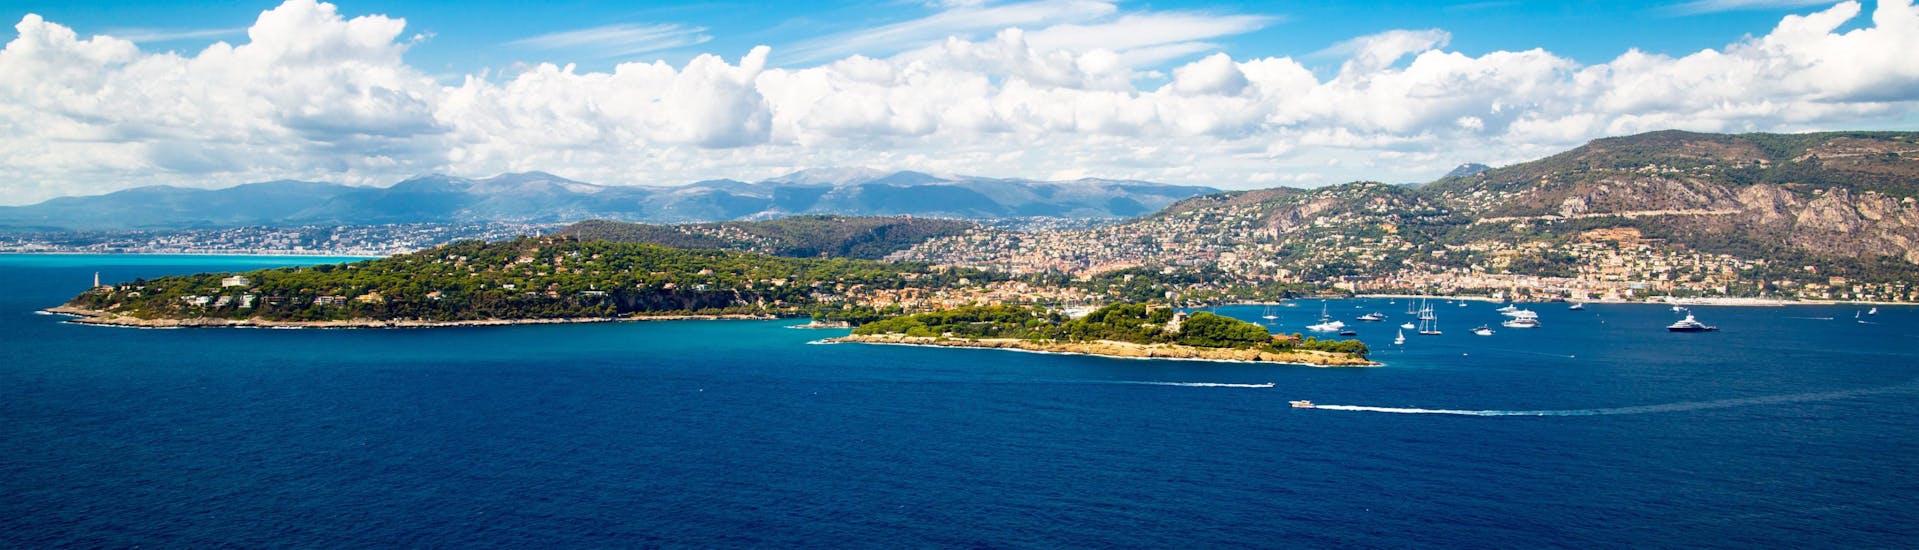 View of the city of Nice from the sea, which is a popular destination to rent a jet ski on French Riviera.